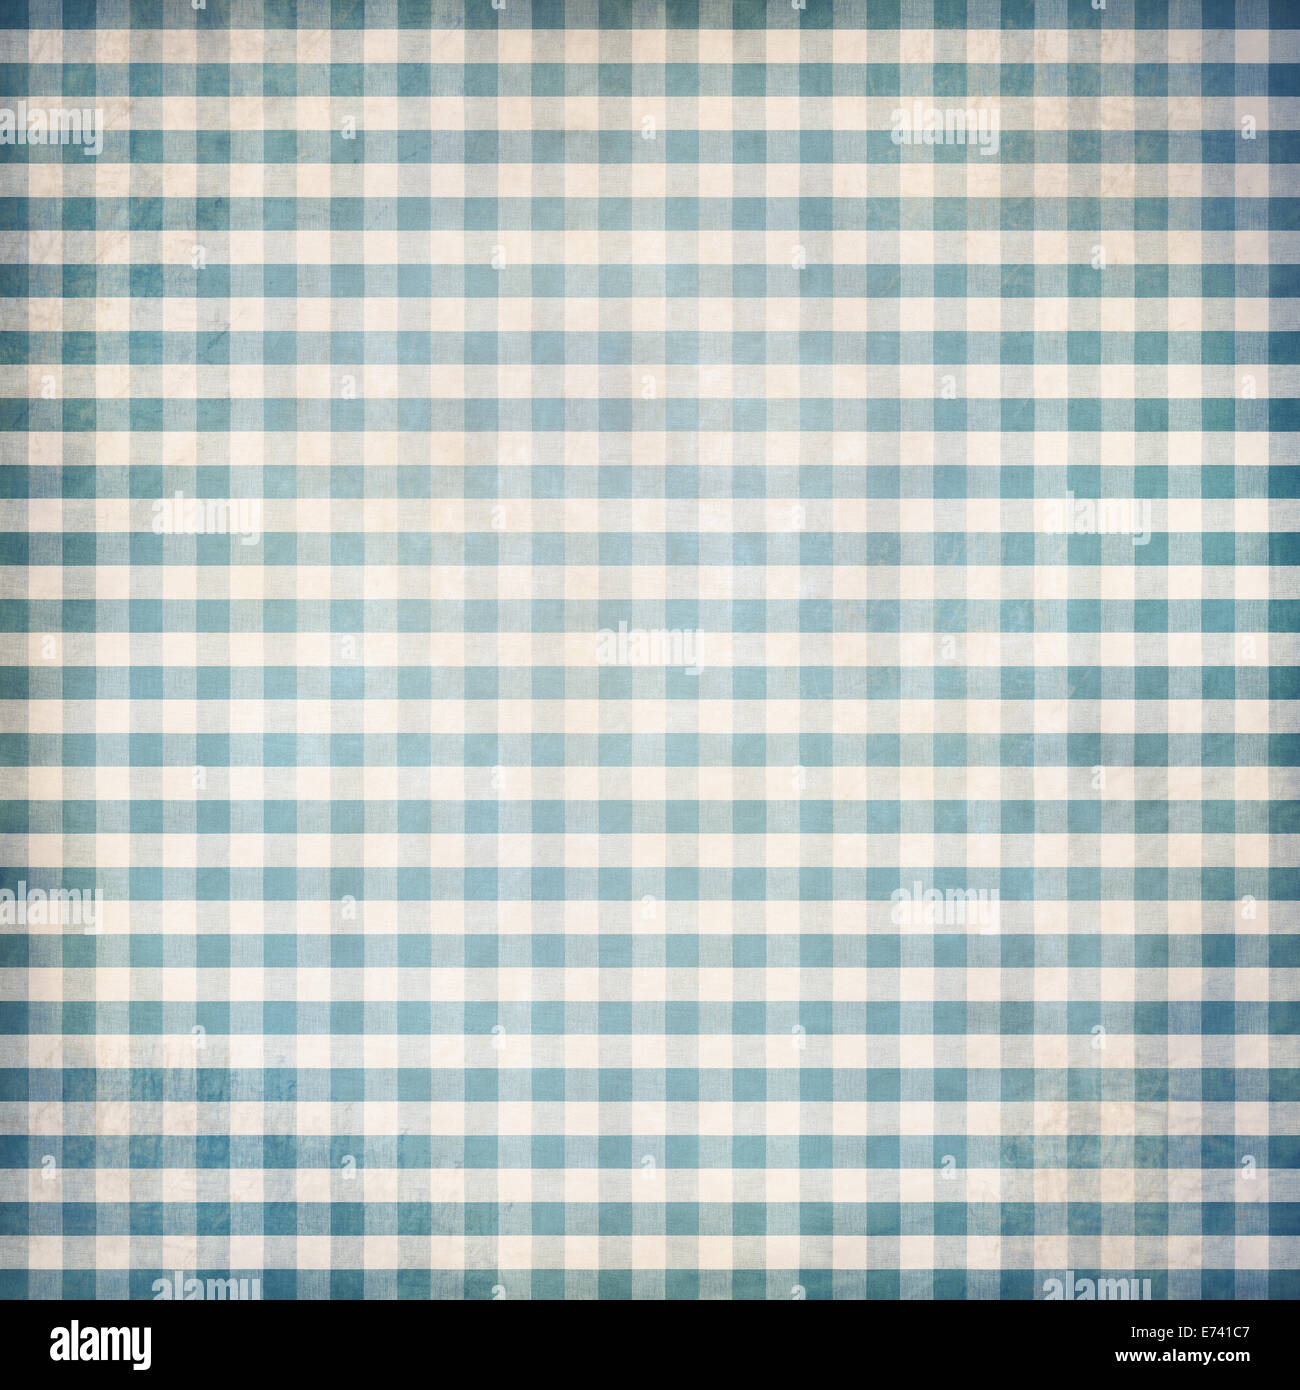 Blue grunge gingham picnic tablecloth background Stock Photo